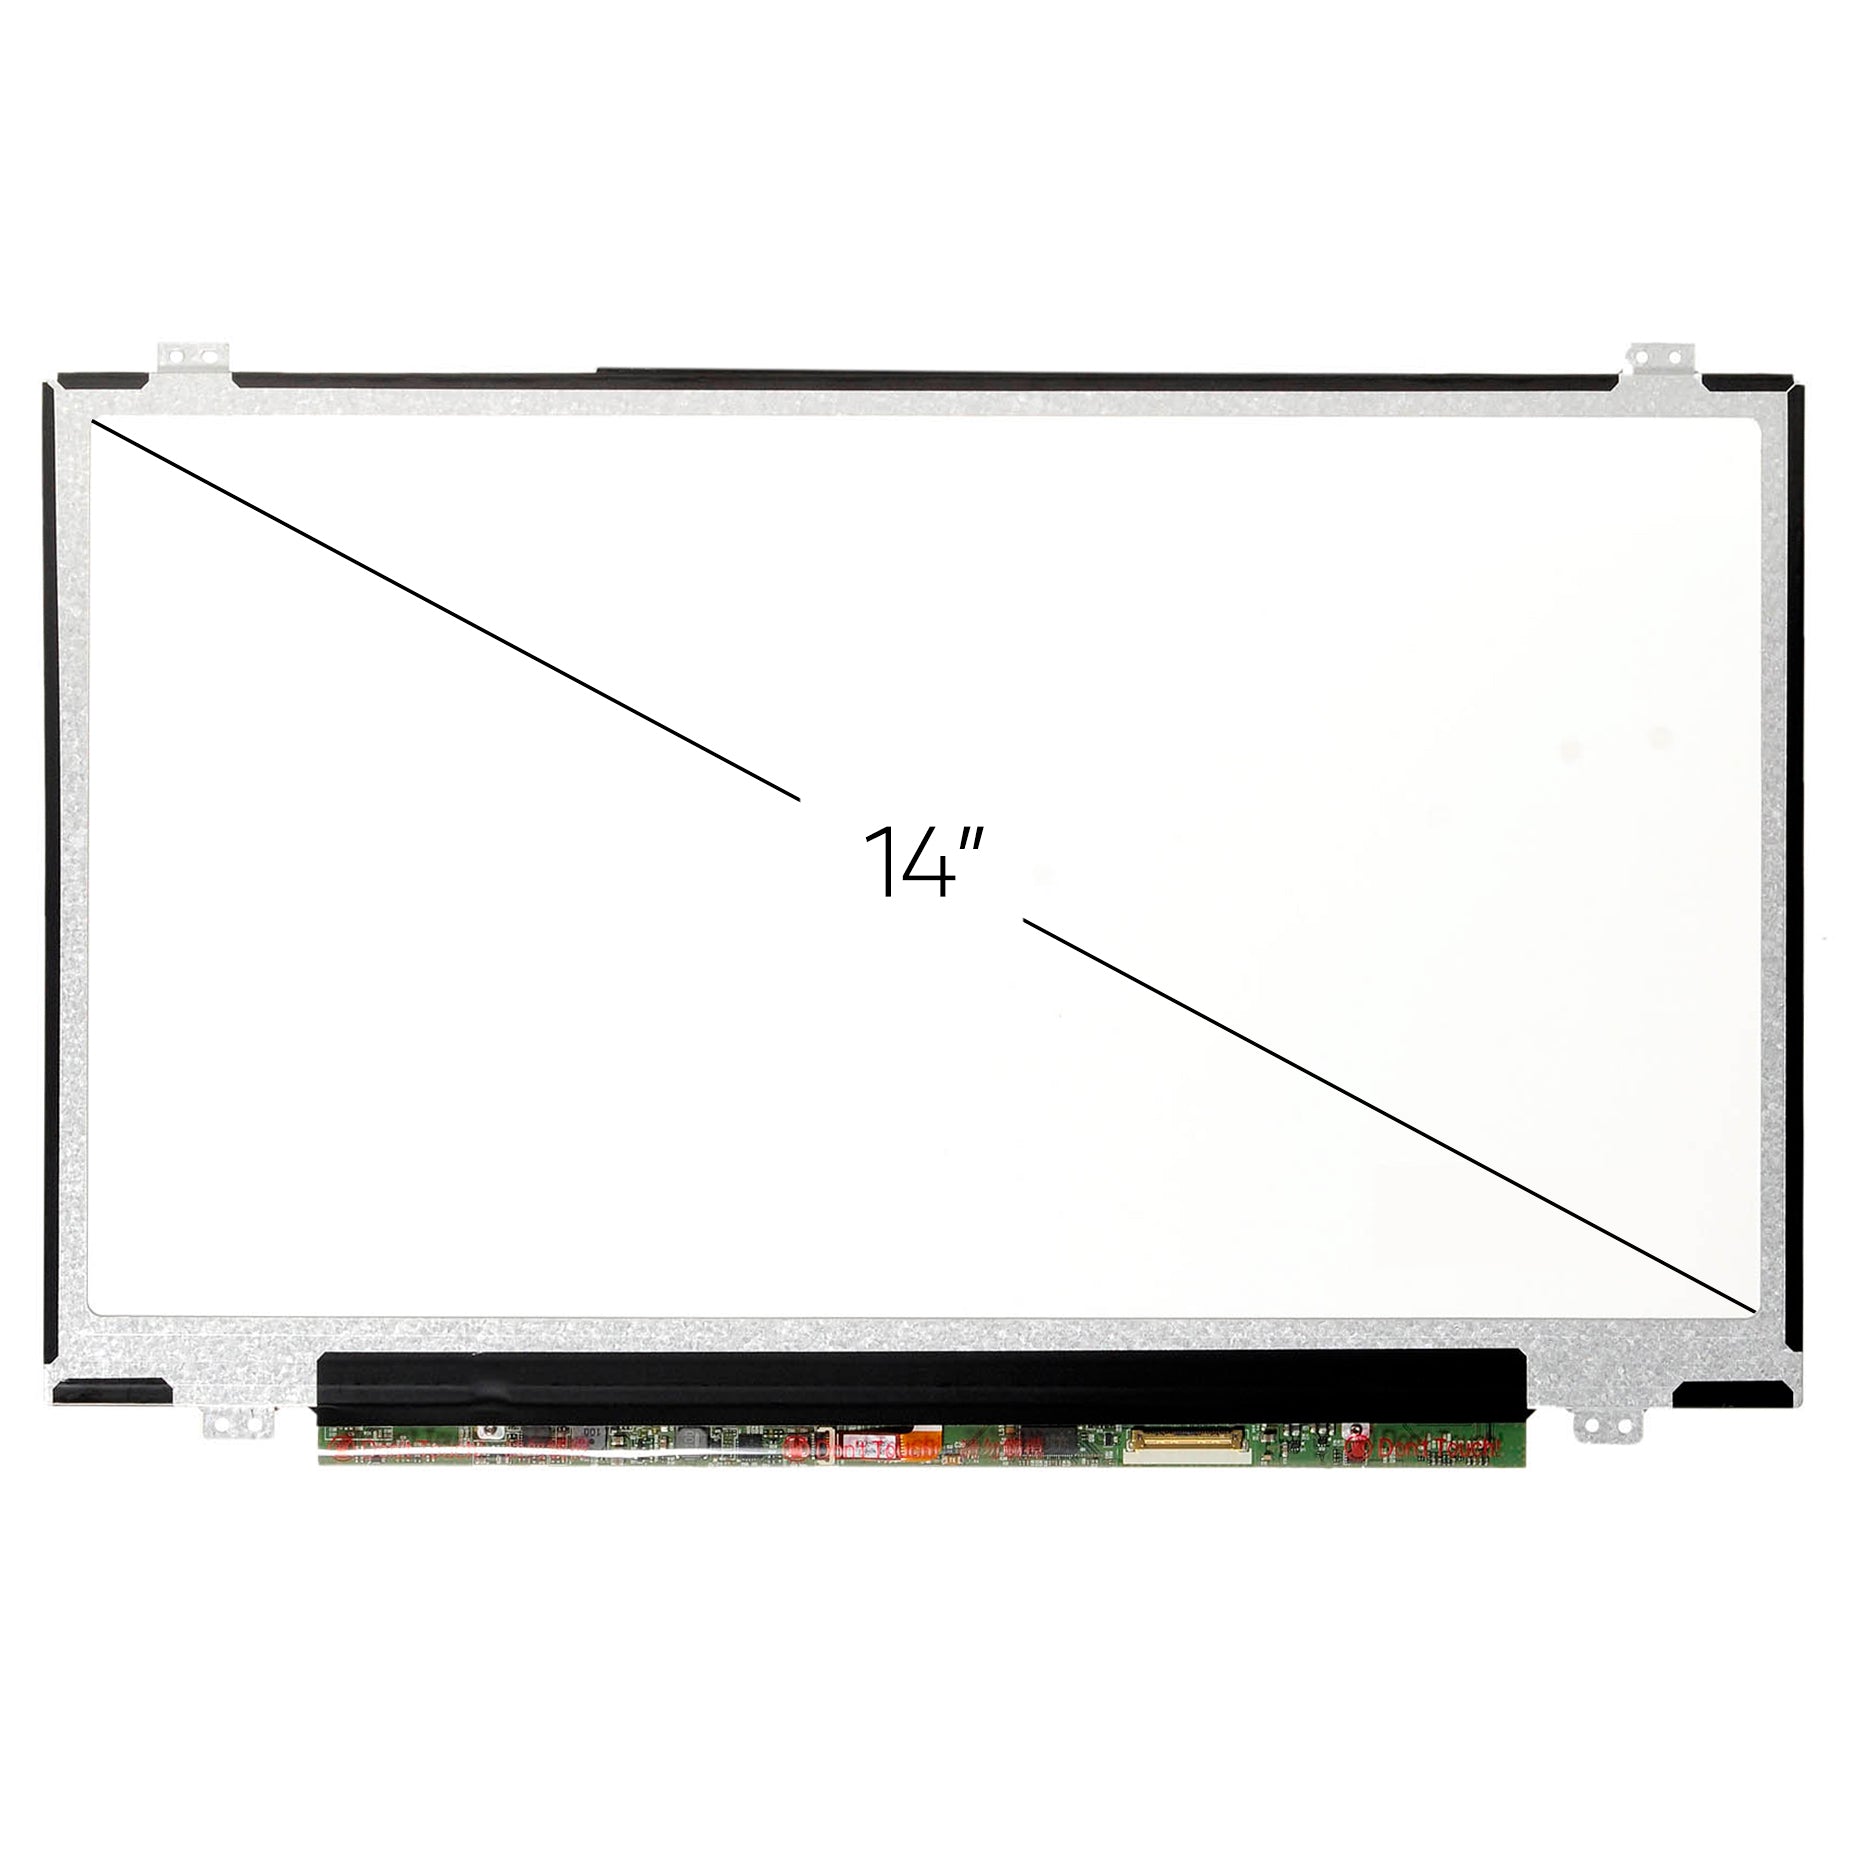 Screen Replacement for Lenovo FRU 01EN100 FHD 1920x1080 IPS Matte LCD LED Display